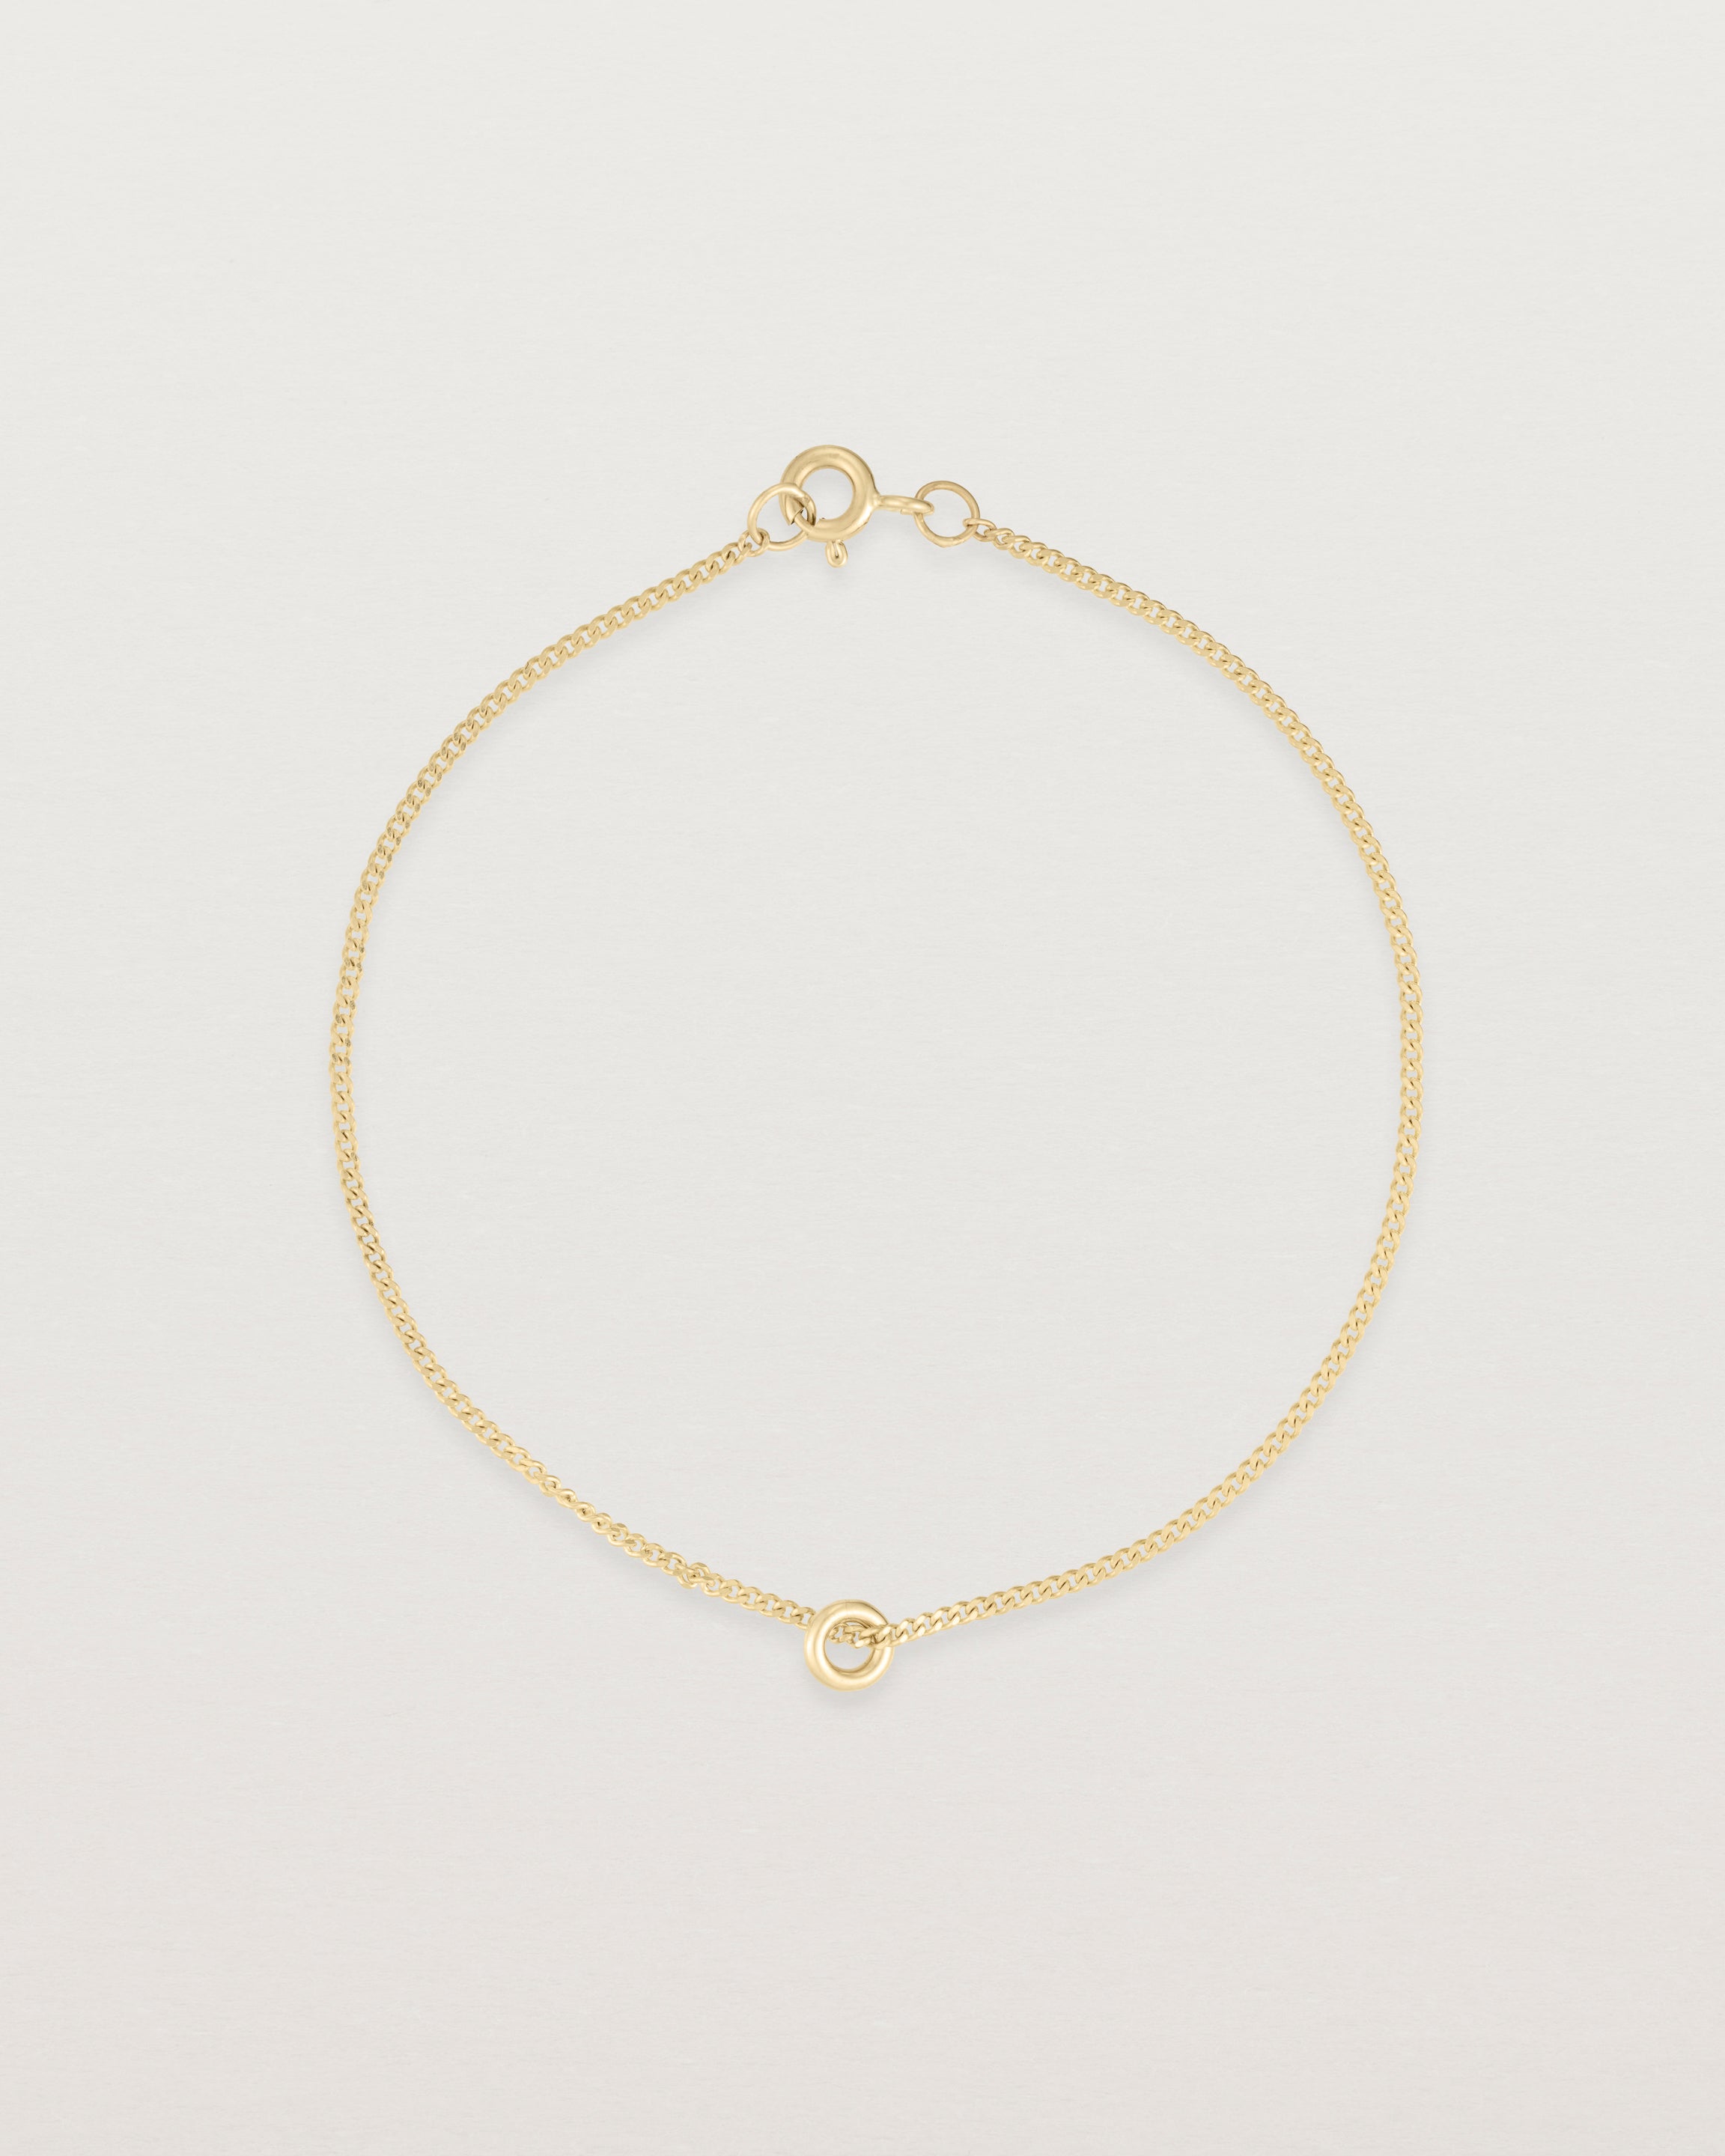 Top view of Aether bracelet featuring one round charm in yellow gold